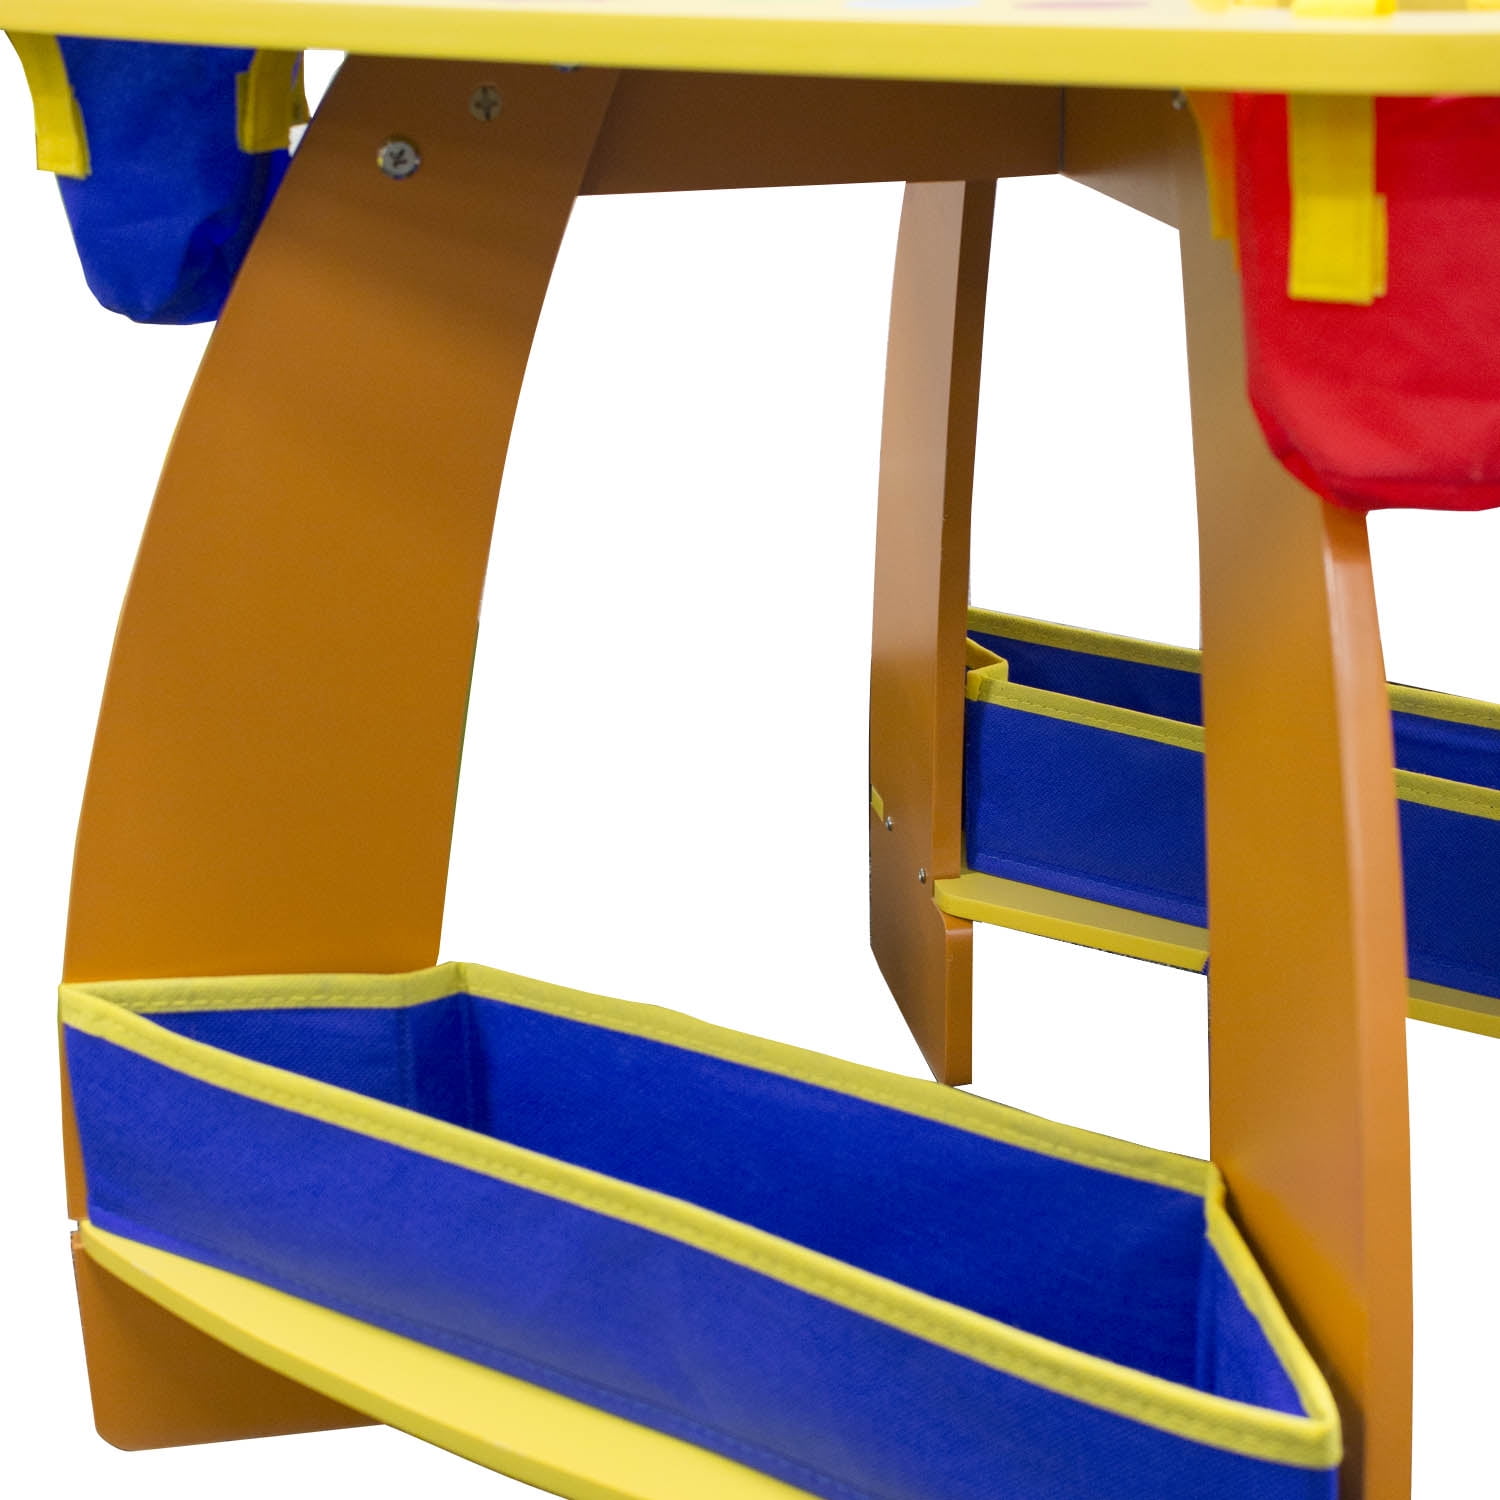 grow n up crayola wooden table & chair set